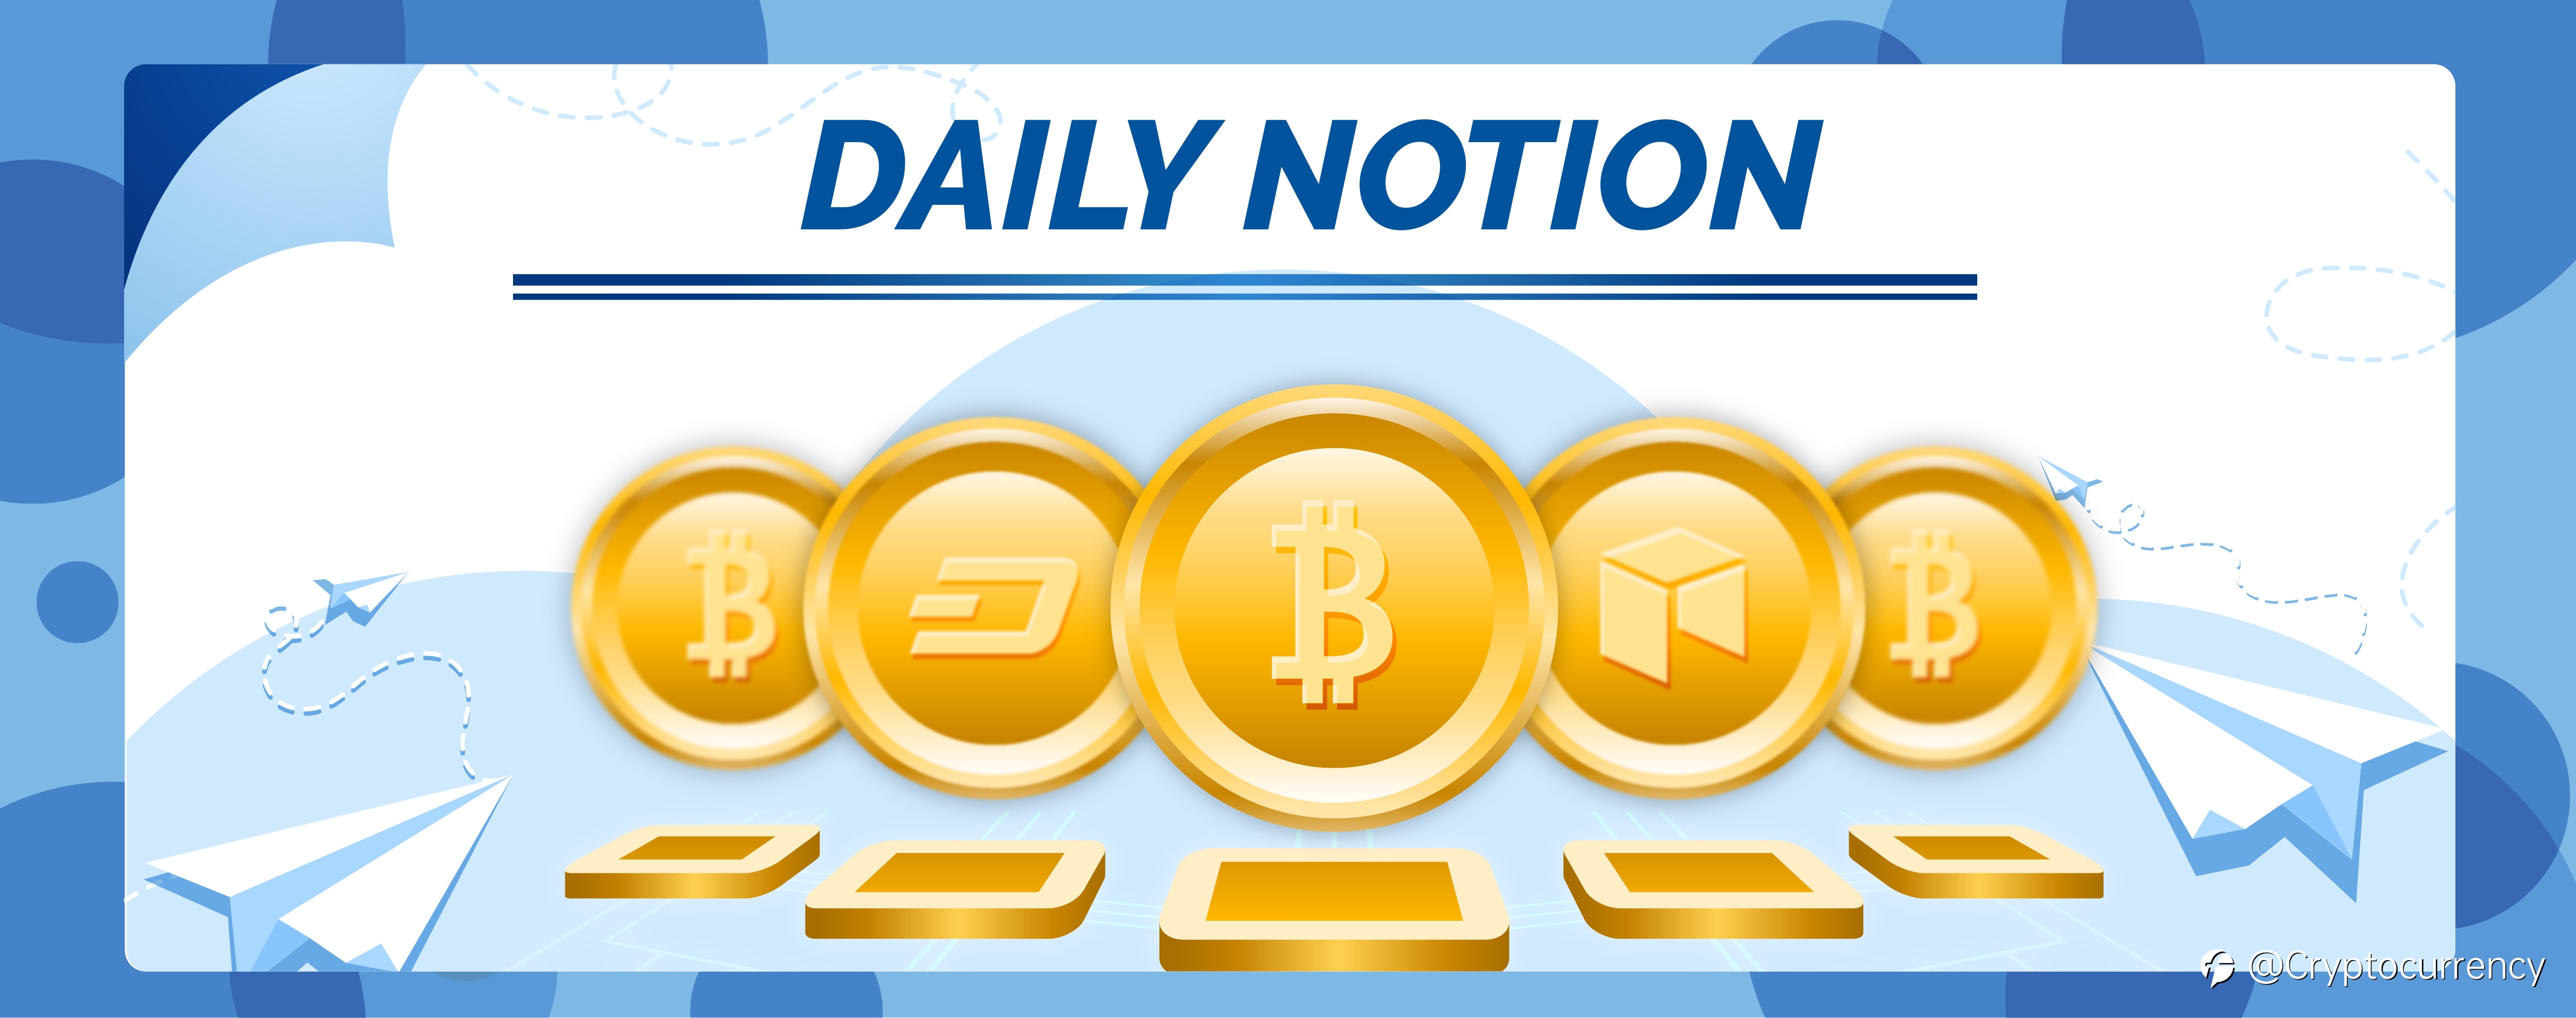 (DAILY NOTION): BTC/USD: Bulls Have Conquered $55,000, What's Next?